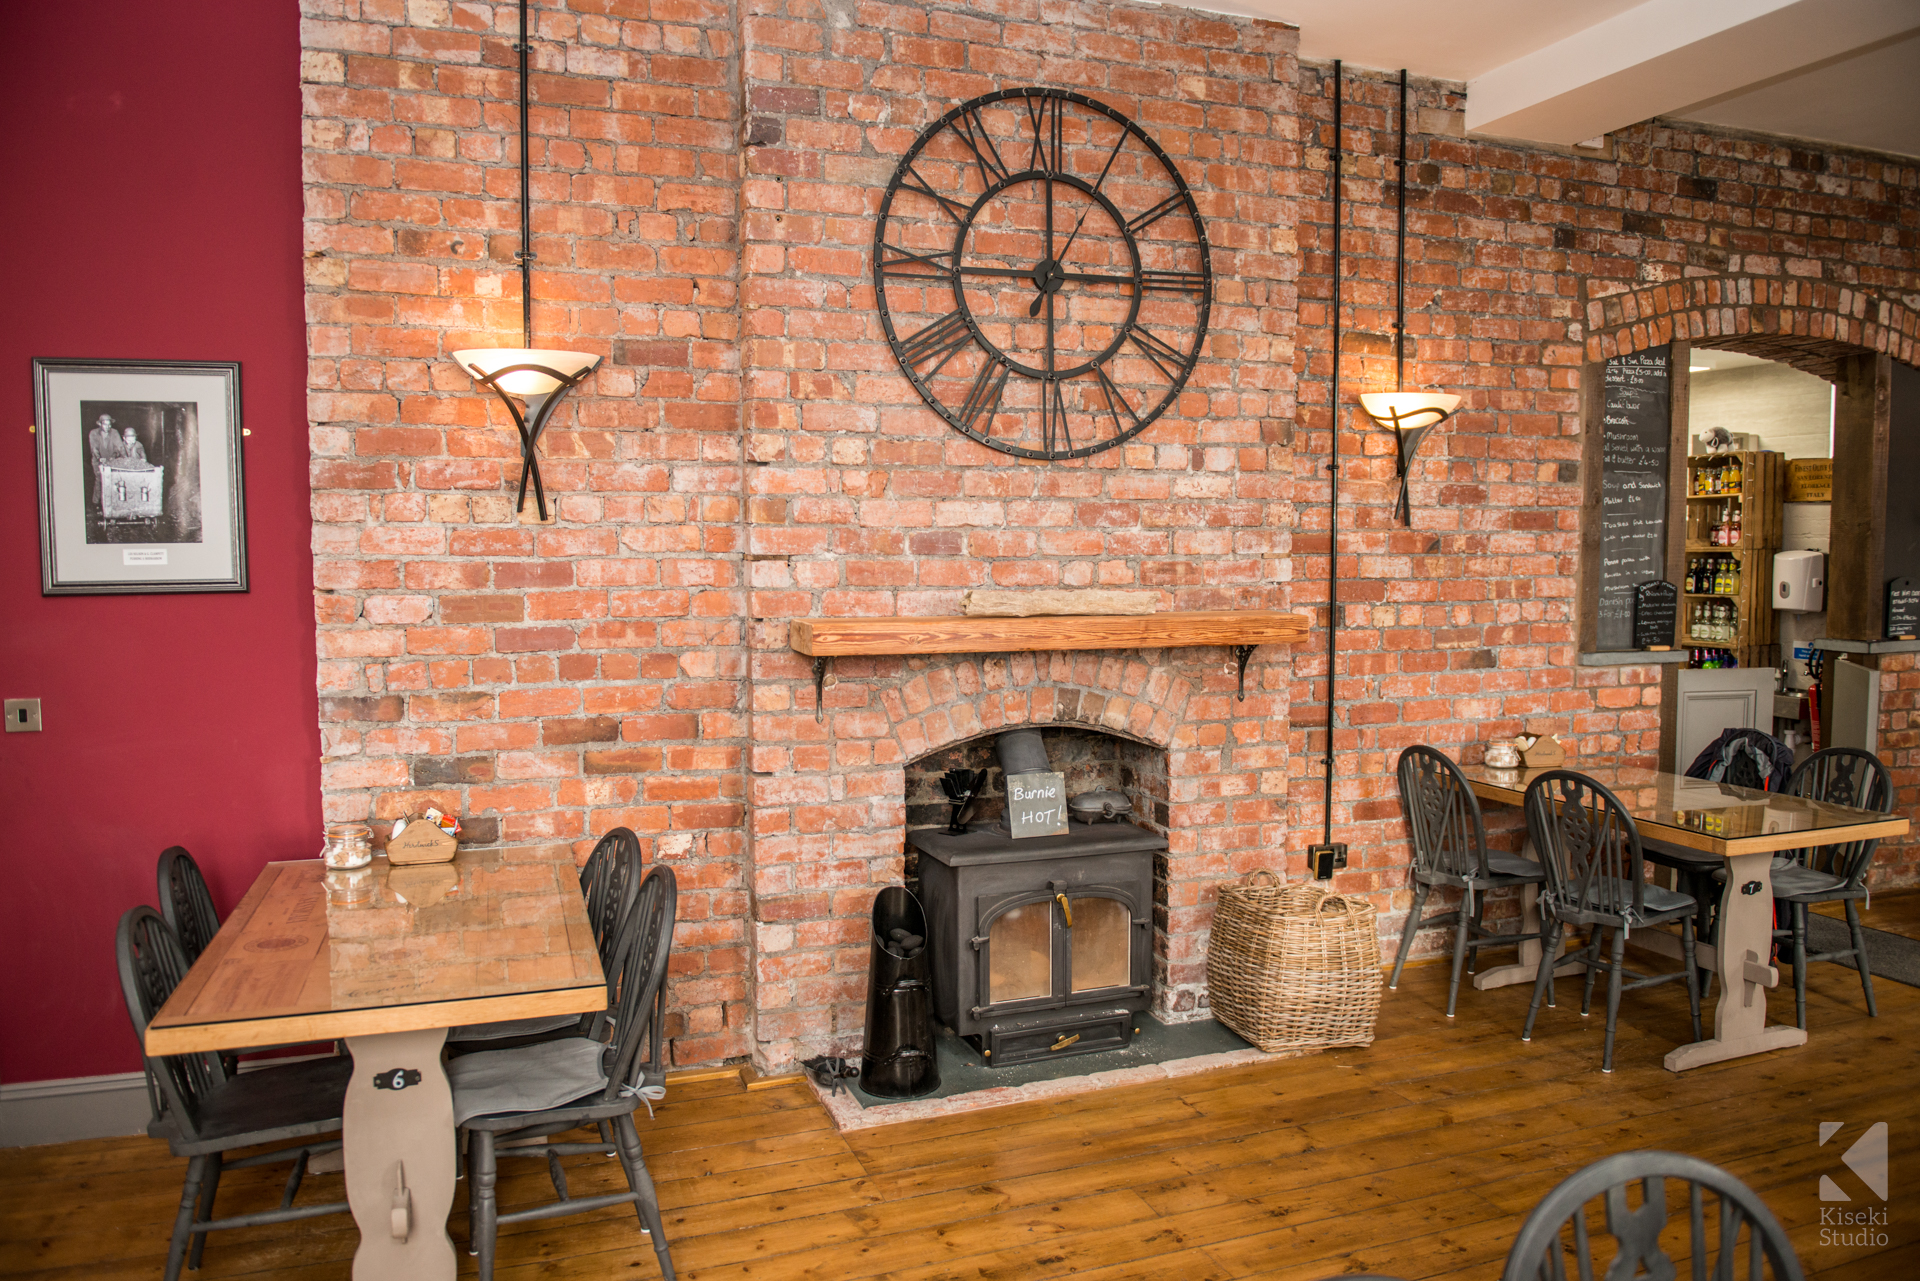 herdwicks-boutique-hotel-dining-area-open-fire-cosy-warm-lake-district-commercial-photography